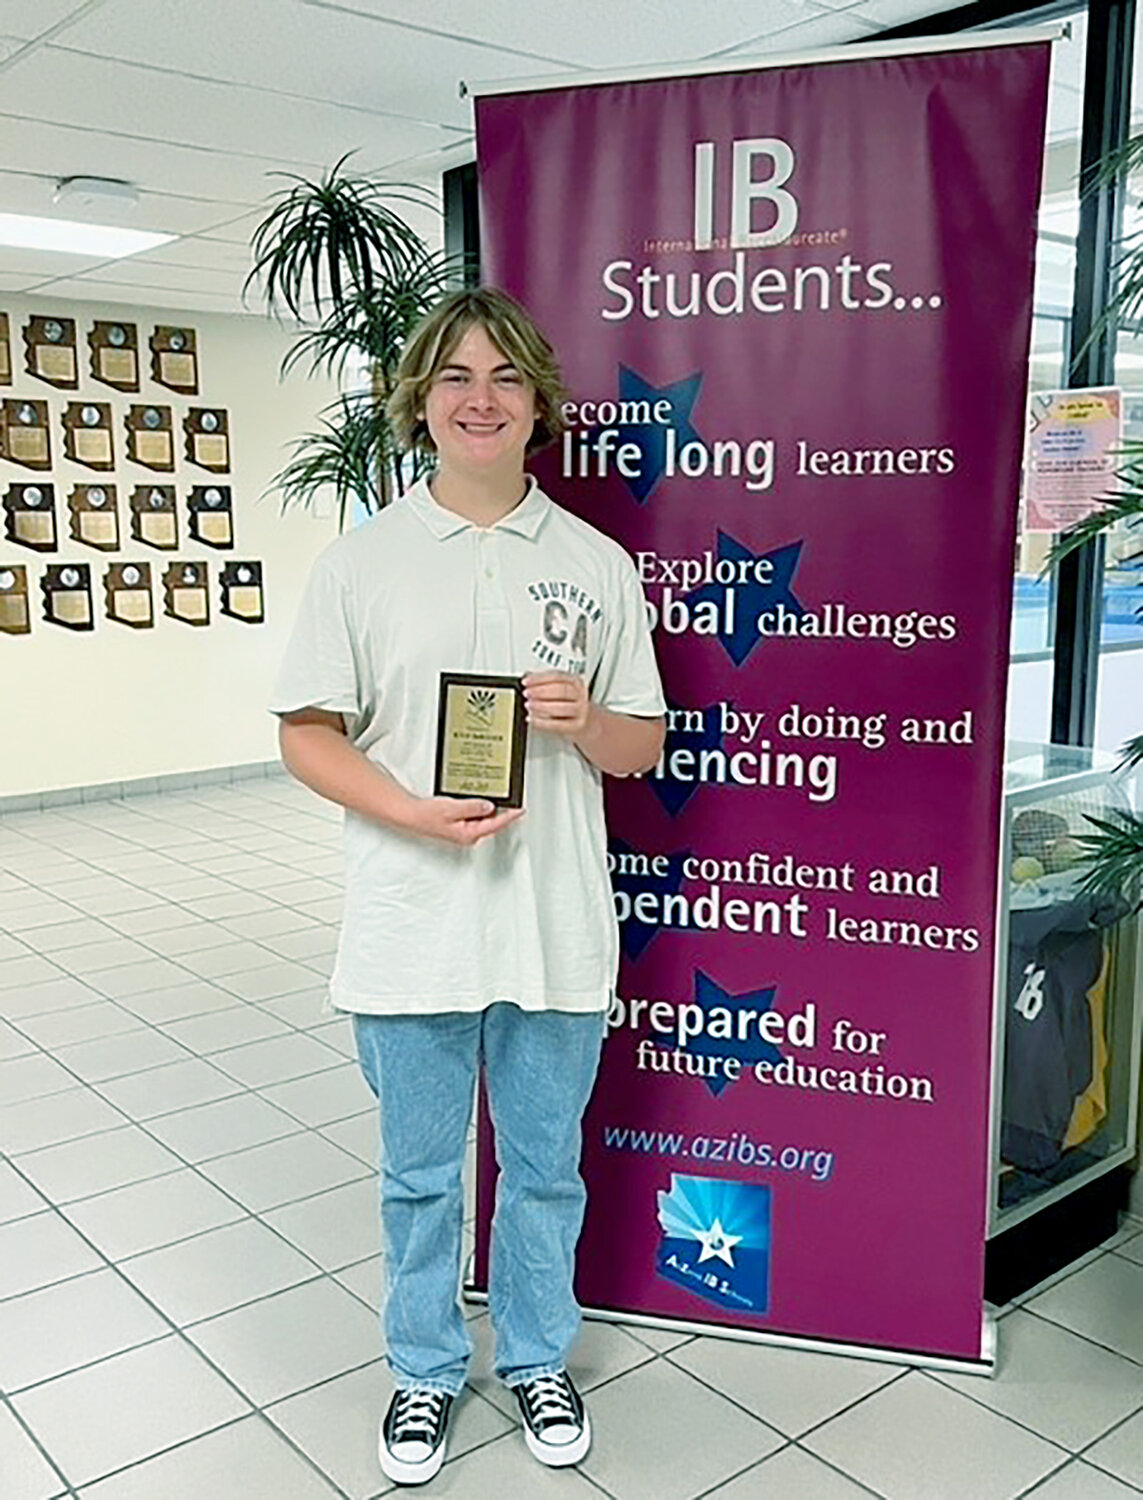 Chandler High School senior Kyle DeRosier has been named the Arizona International Baccalaureate Student of the Year. He received a plaque and a cash award at a Sept. 8 event.